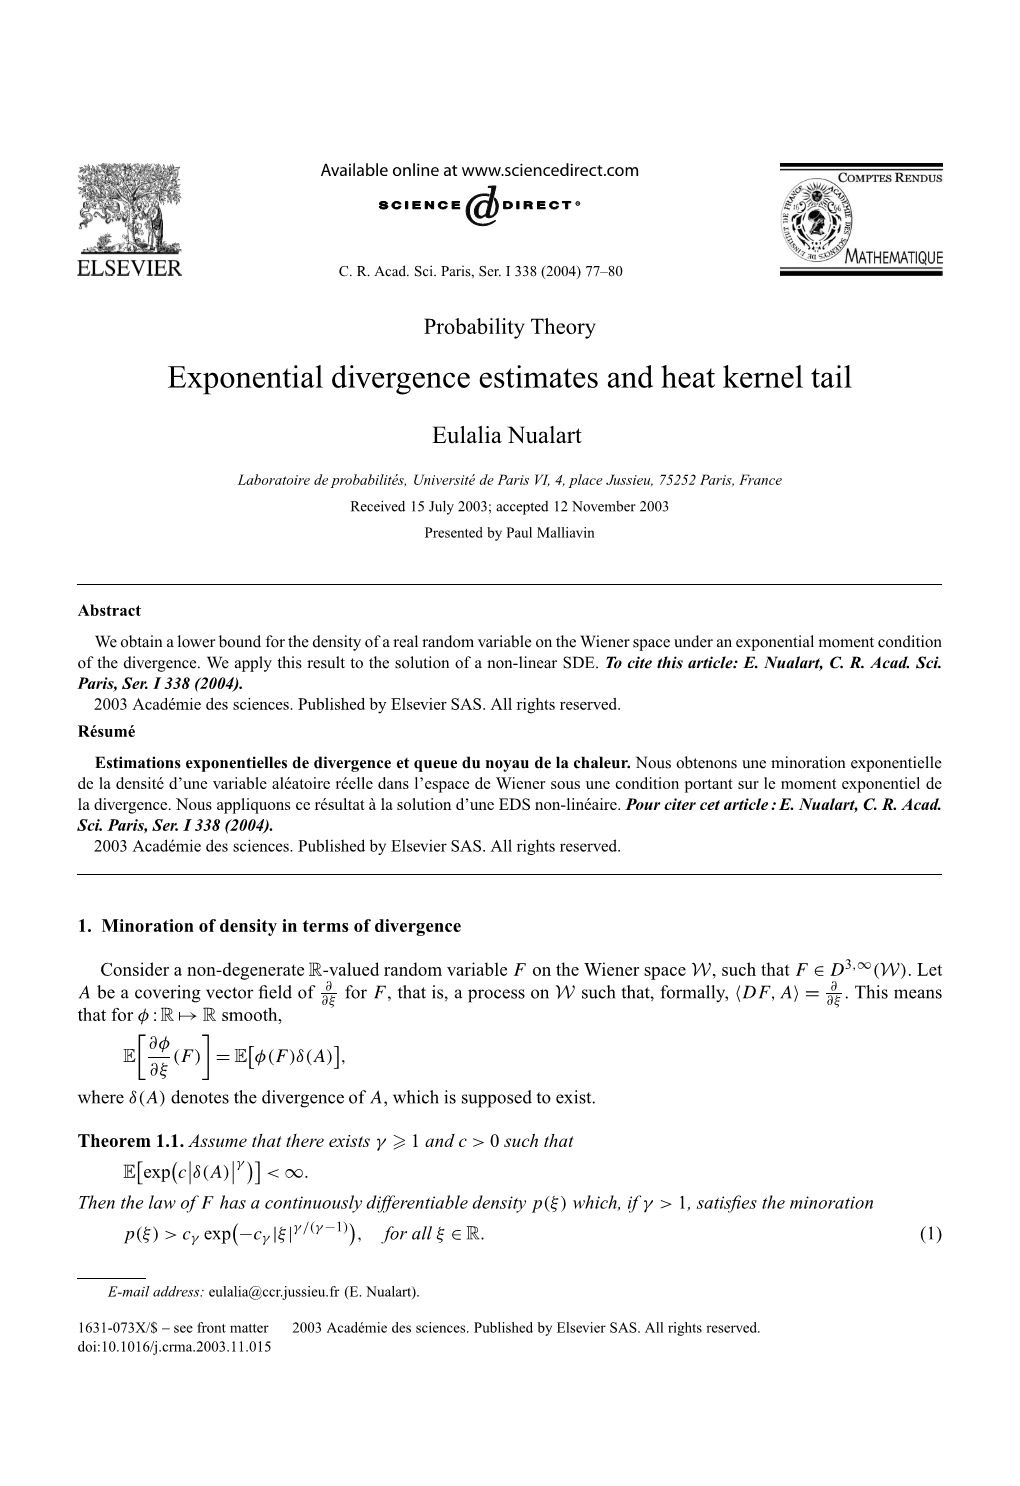 Exponential Divergence Estimates and Heat Kernel Tail